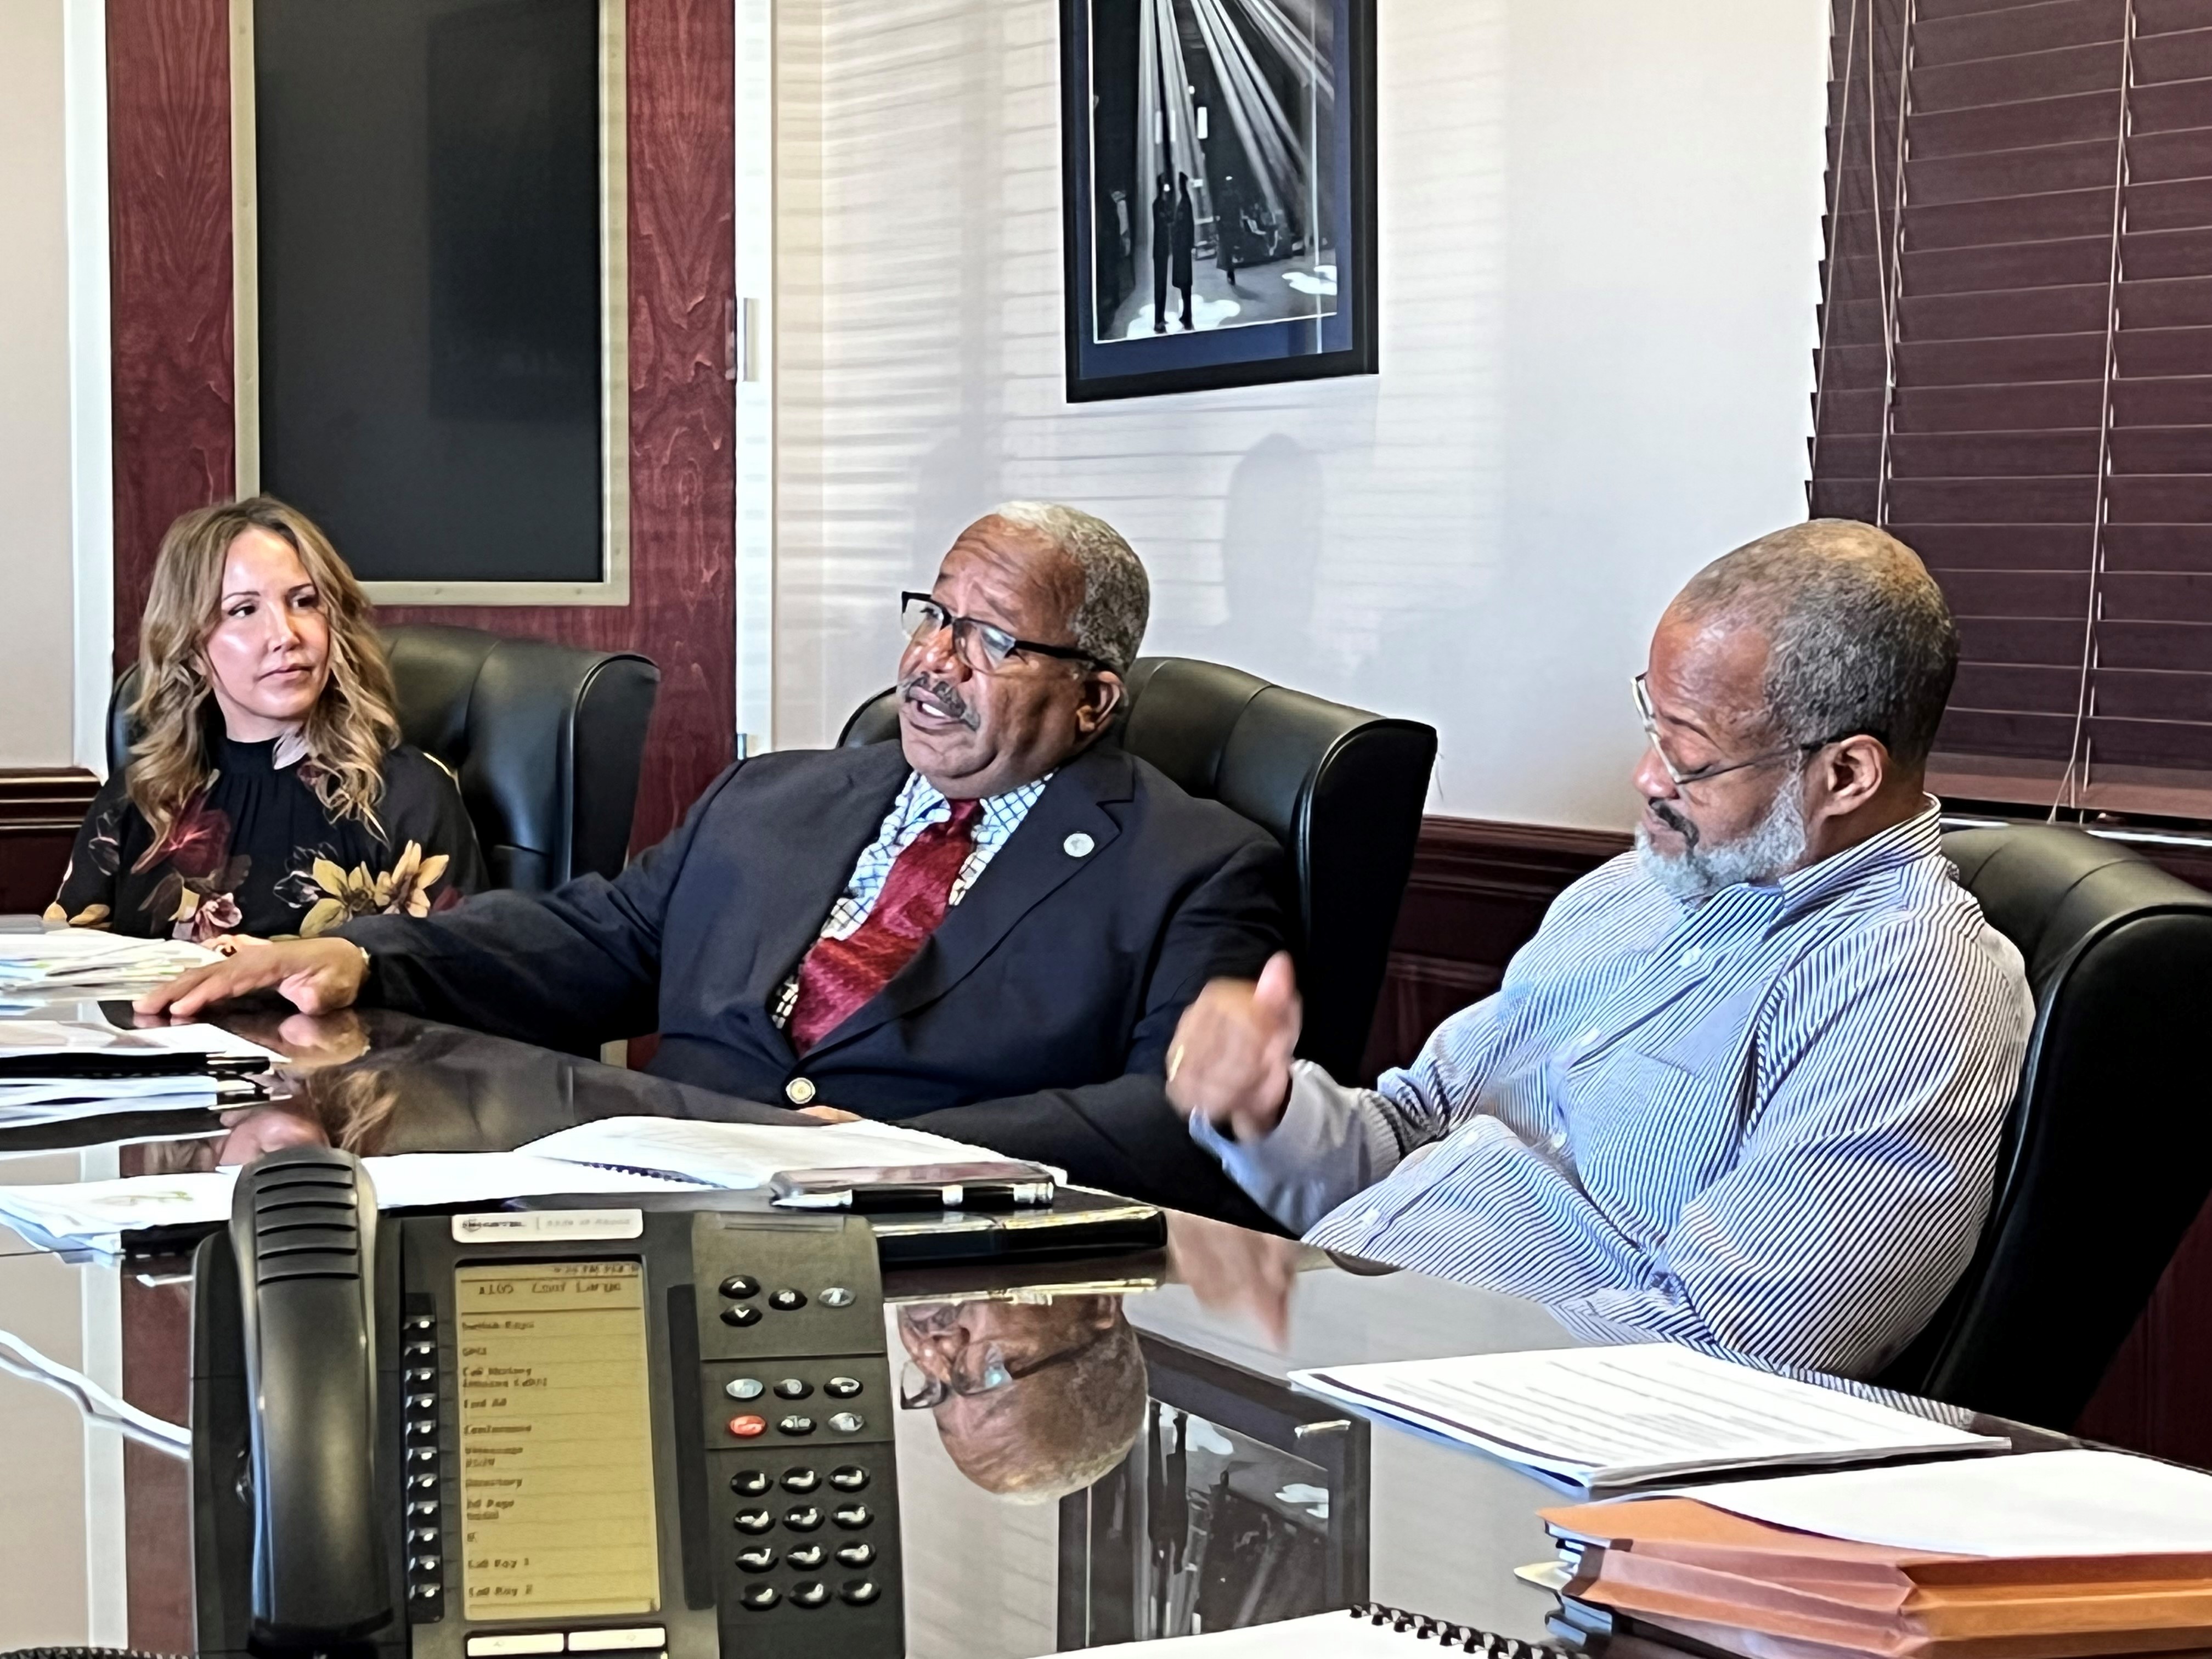 February 11, 2022: Mayor Keith James dropped in on the Board Meeting & spoke with the Trustees. Mayor James thanked the Trustees and Staff for their efforts. 